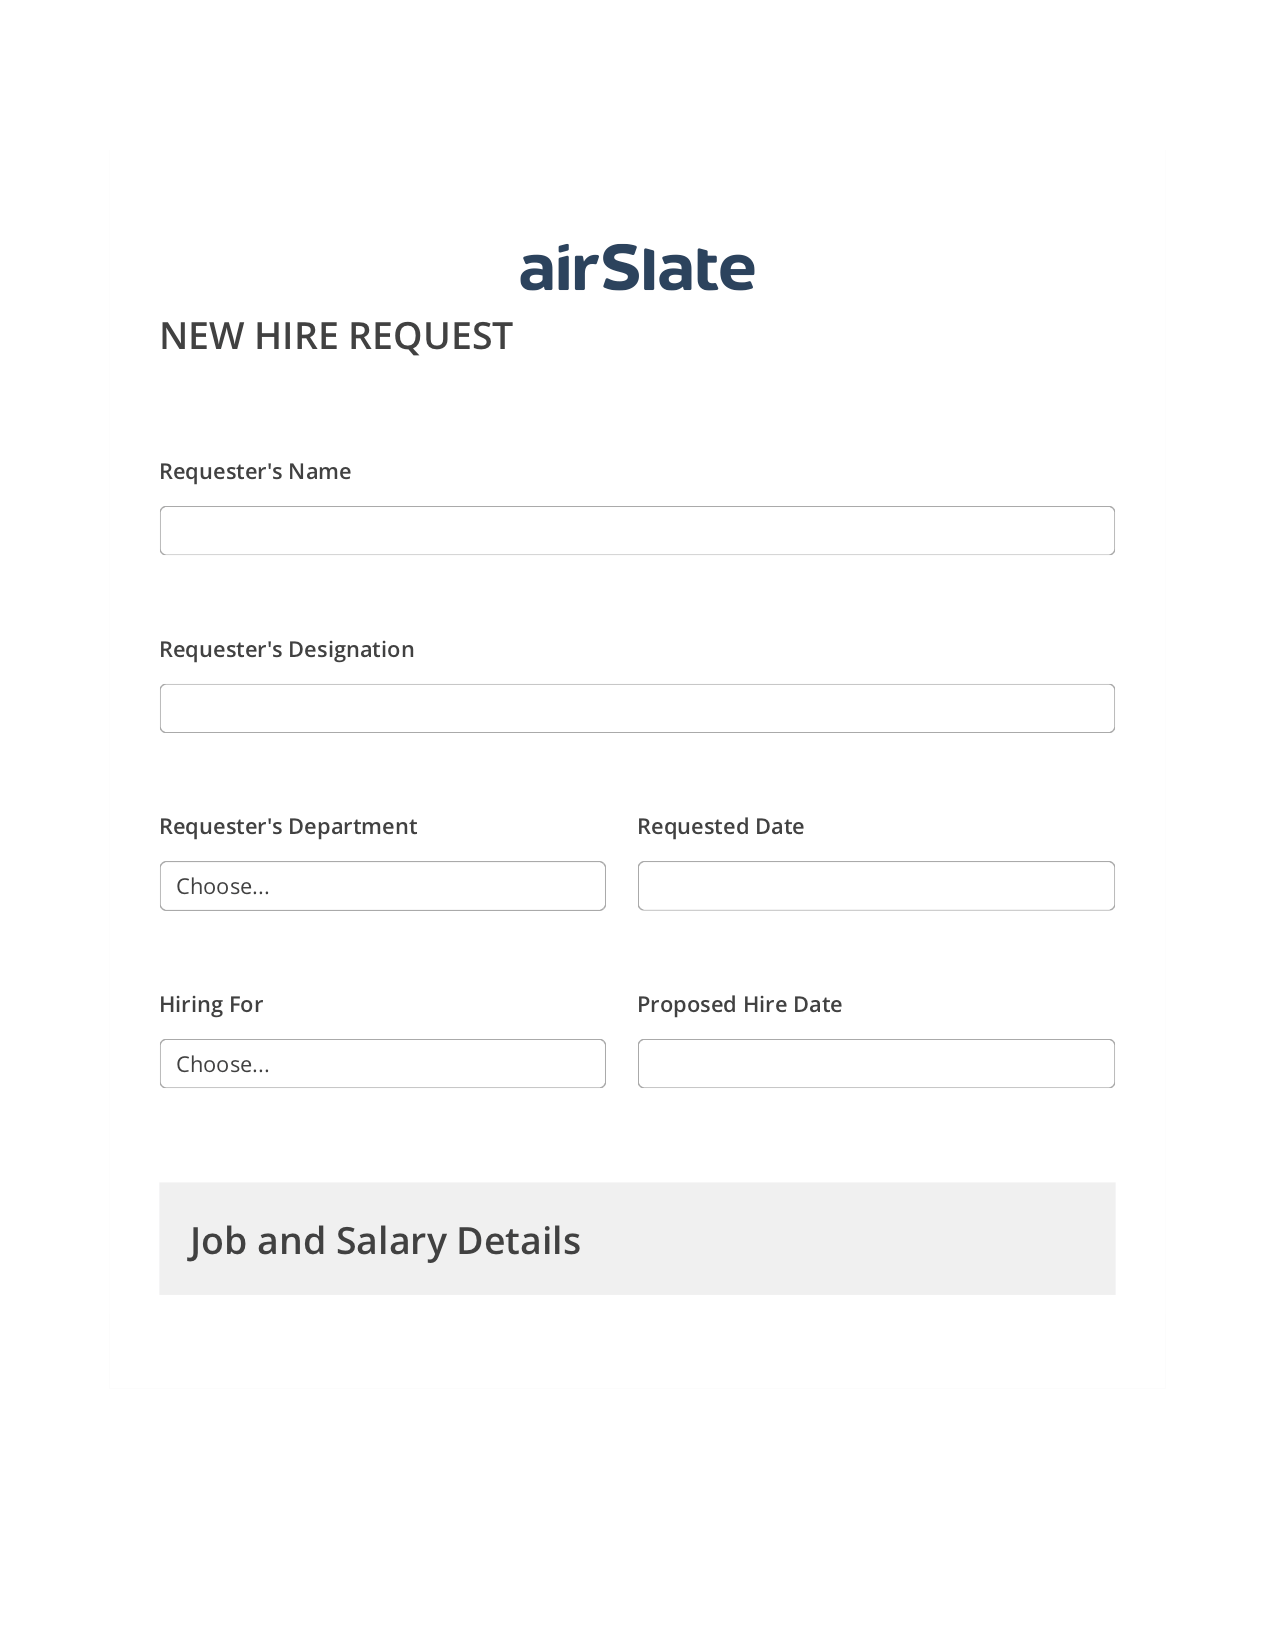 Hiring Request Workflow Pre-fill from Excel Spreadsheet Bot, Remove Slate Bot, Export to Smartsheet